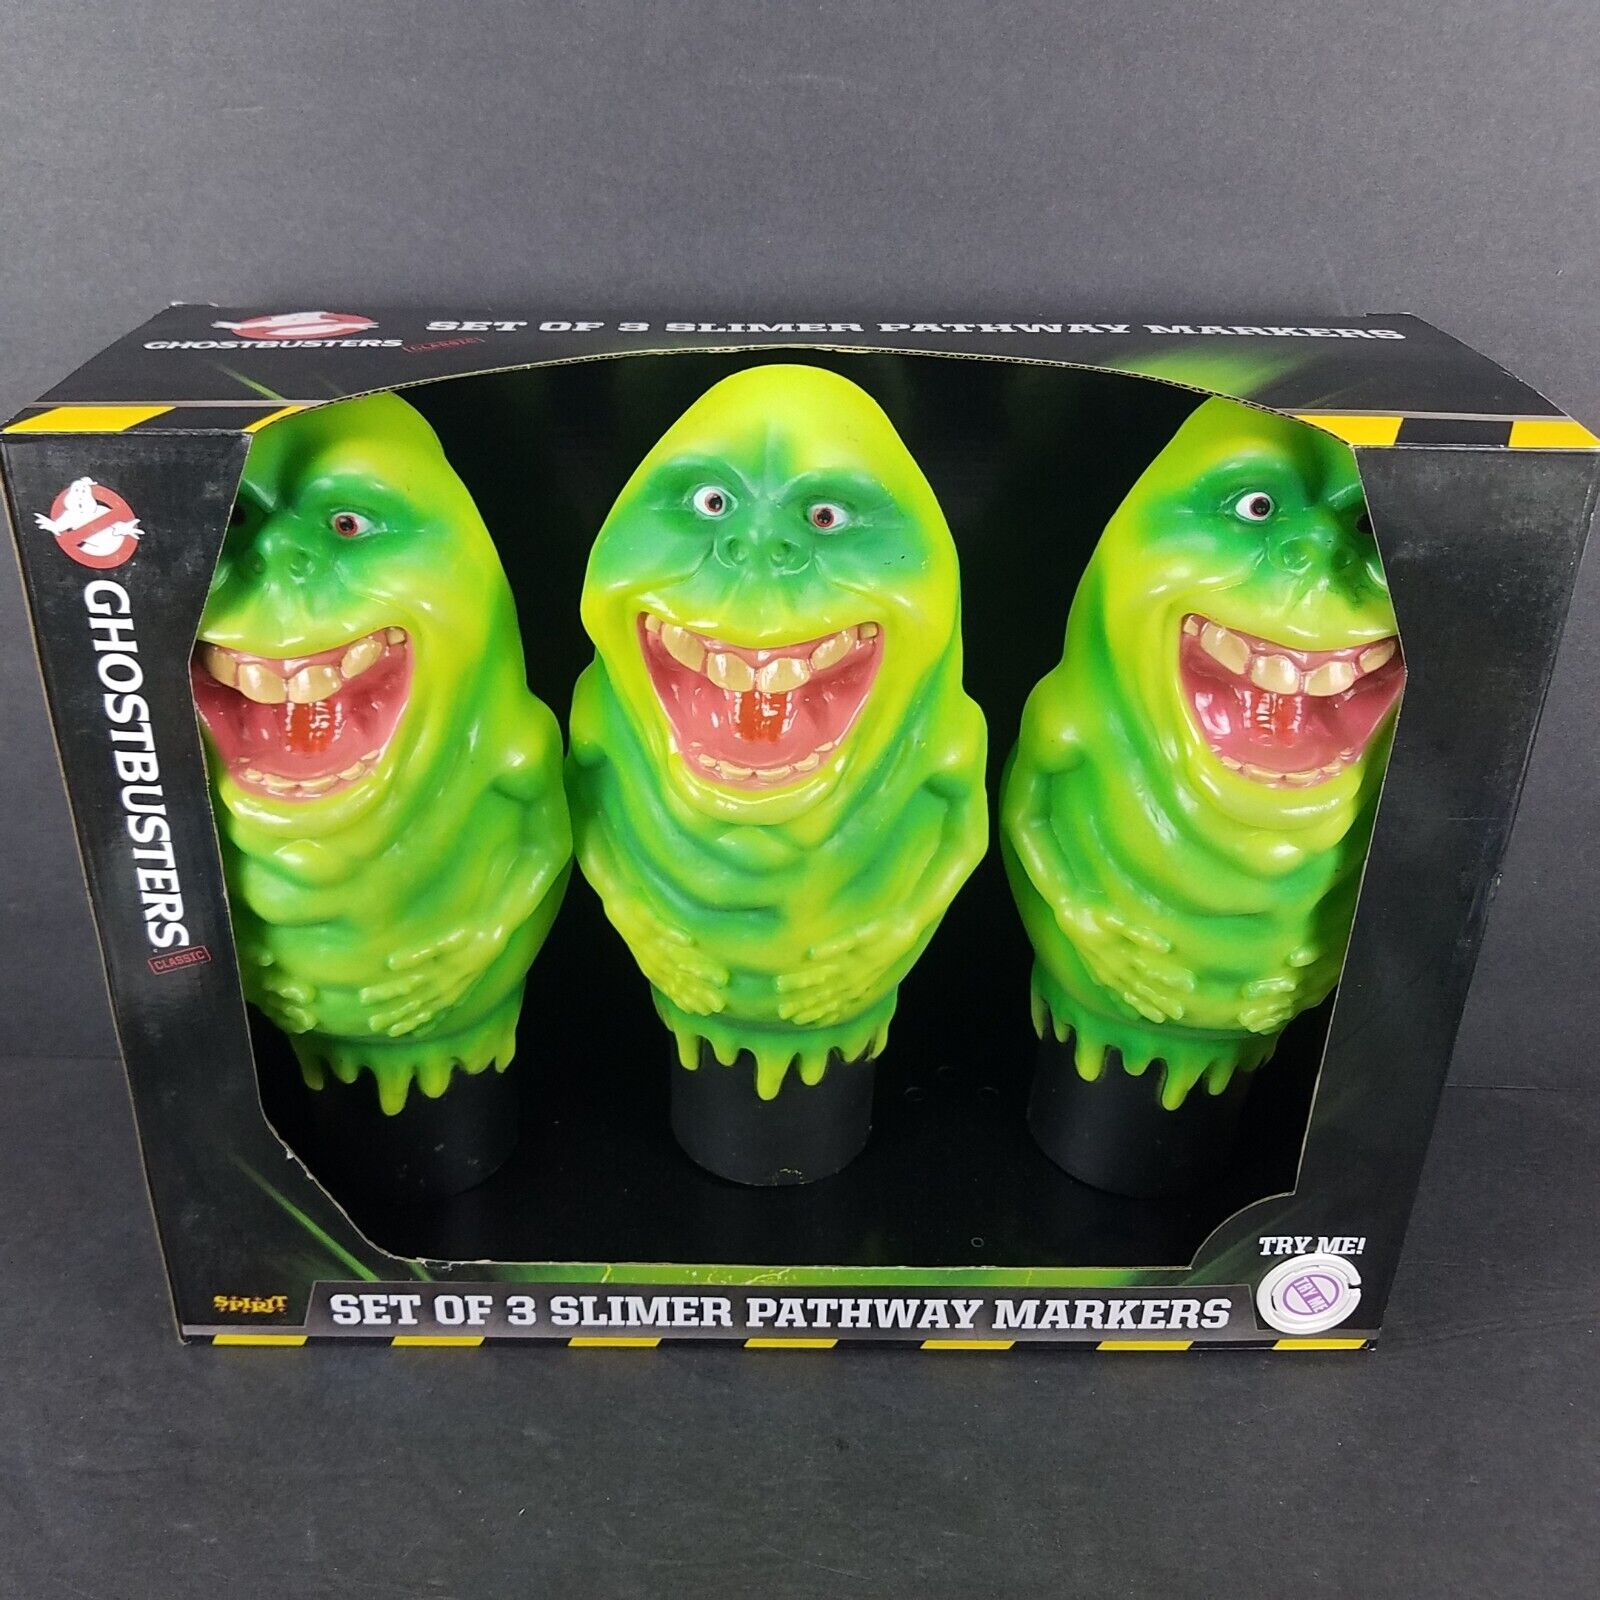 NEW Slimer Pathway Markers Ghostbusters Classic Set of 3 Spirit Halloween